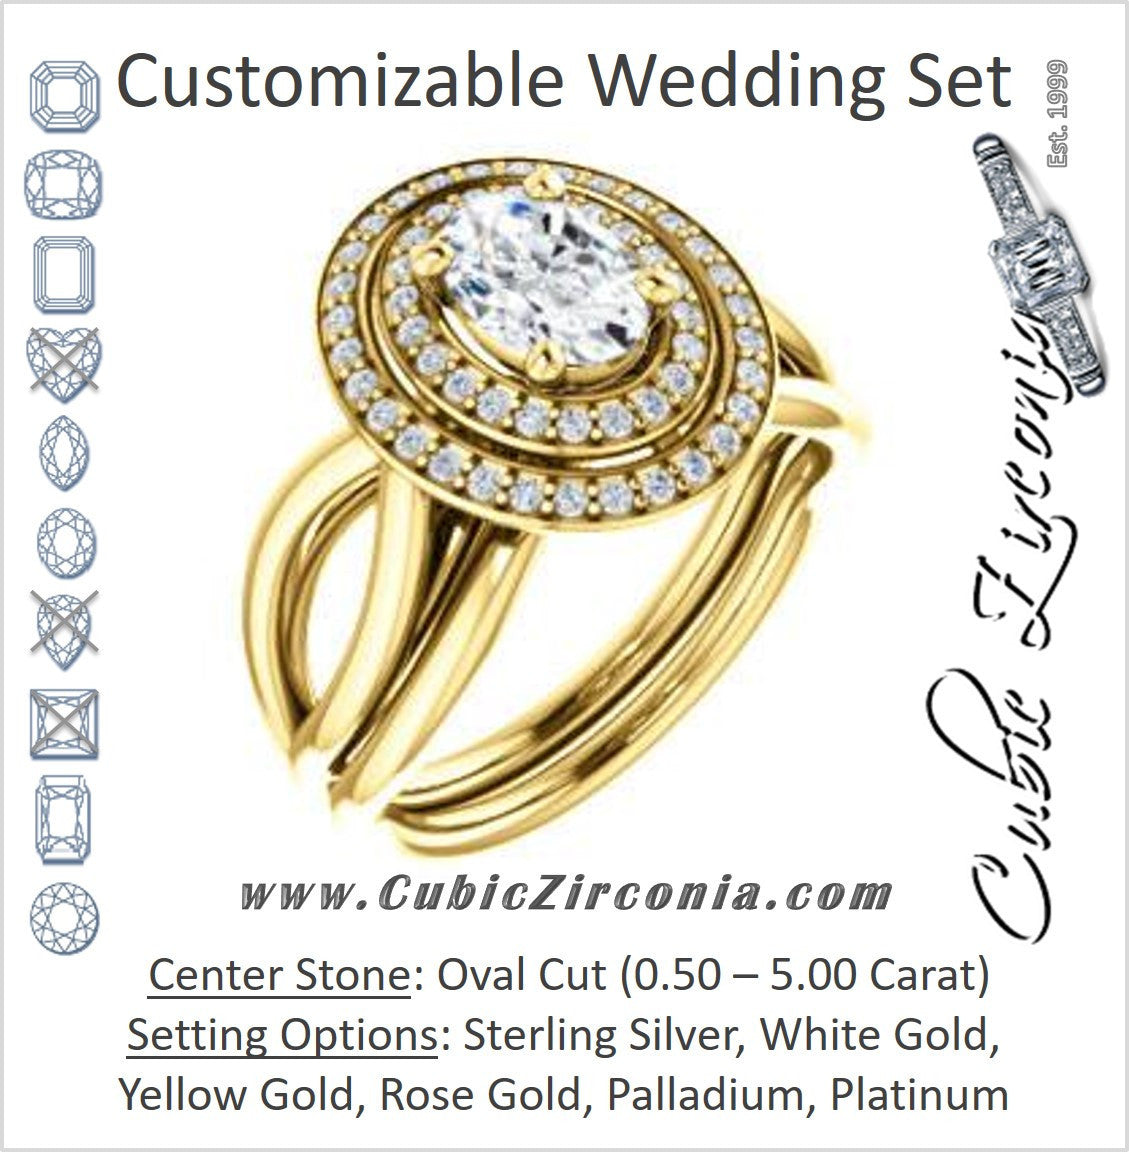 CZ Wedding Set, featuring The Magda Lesli engagement ring (Customizable Double-Halo Style Oval Cut with Curving Split Band)